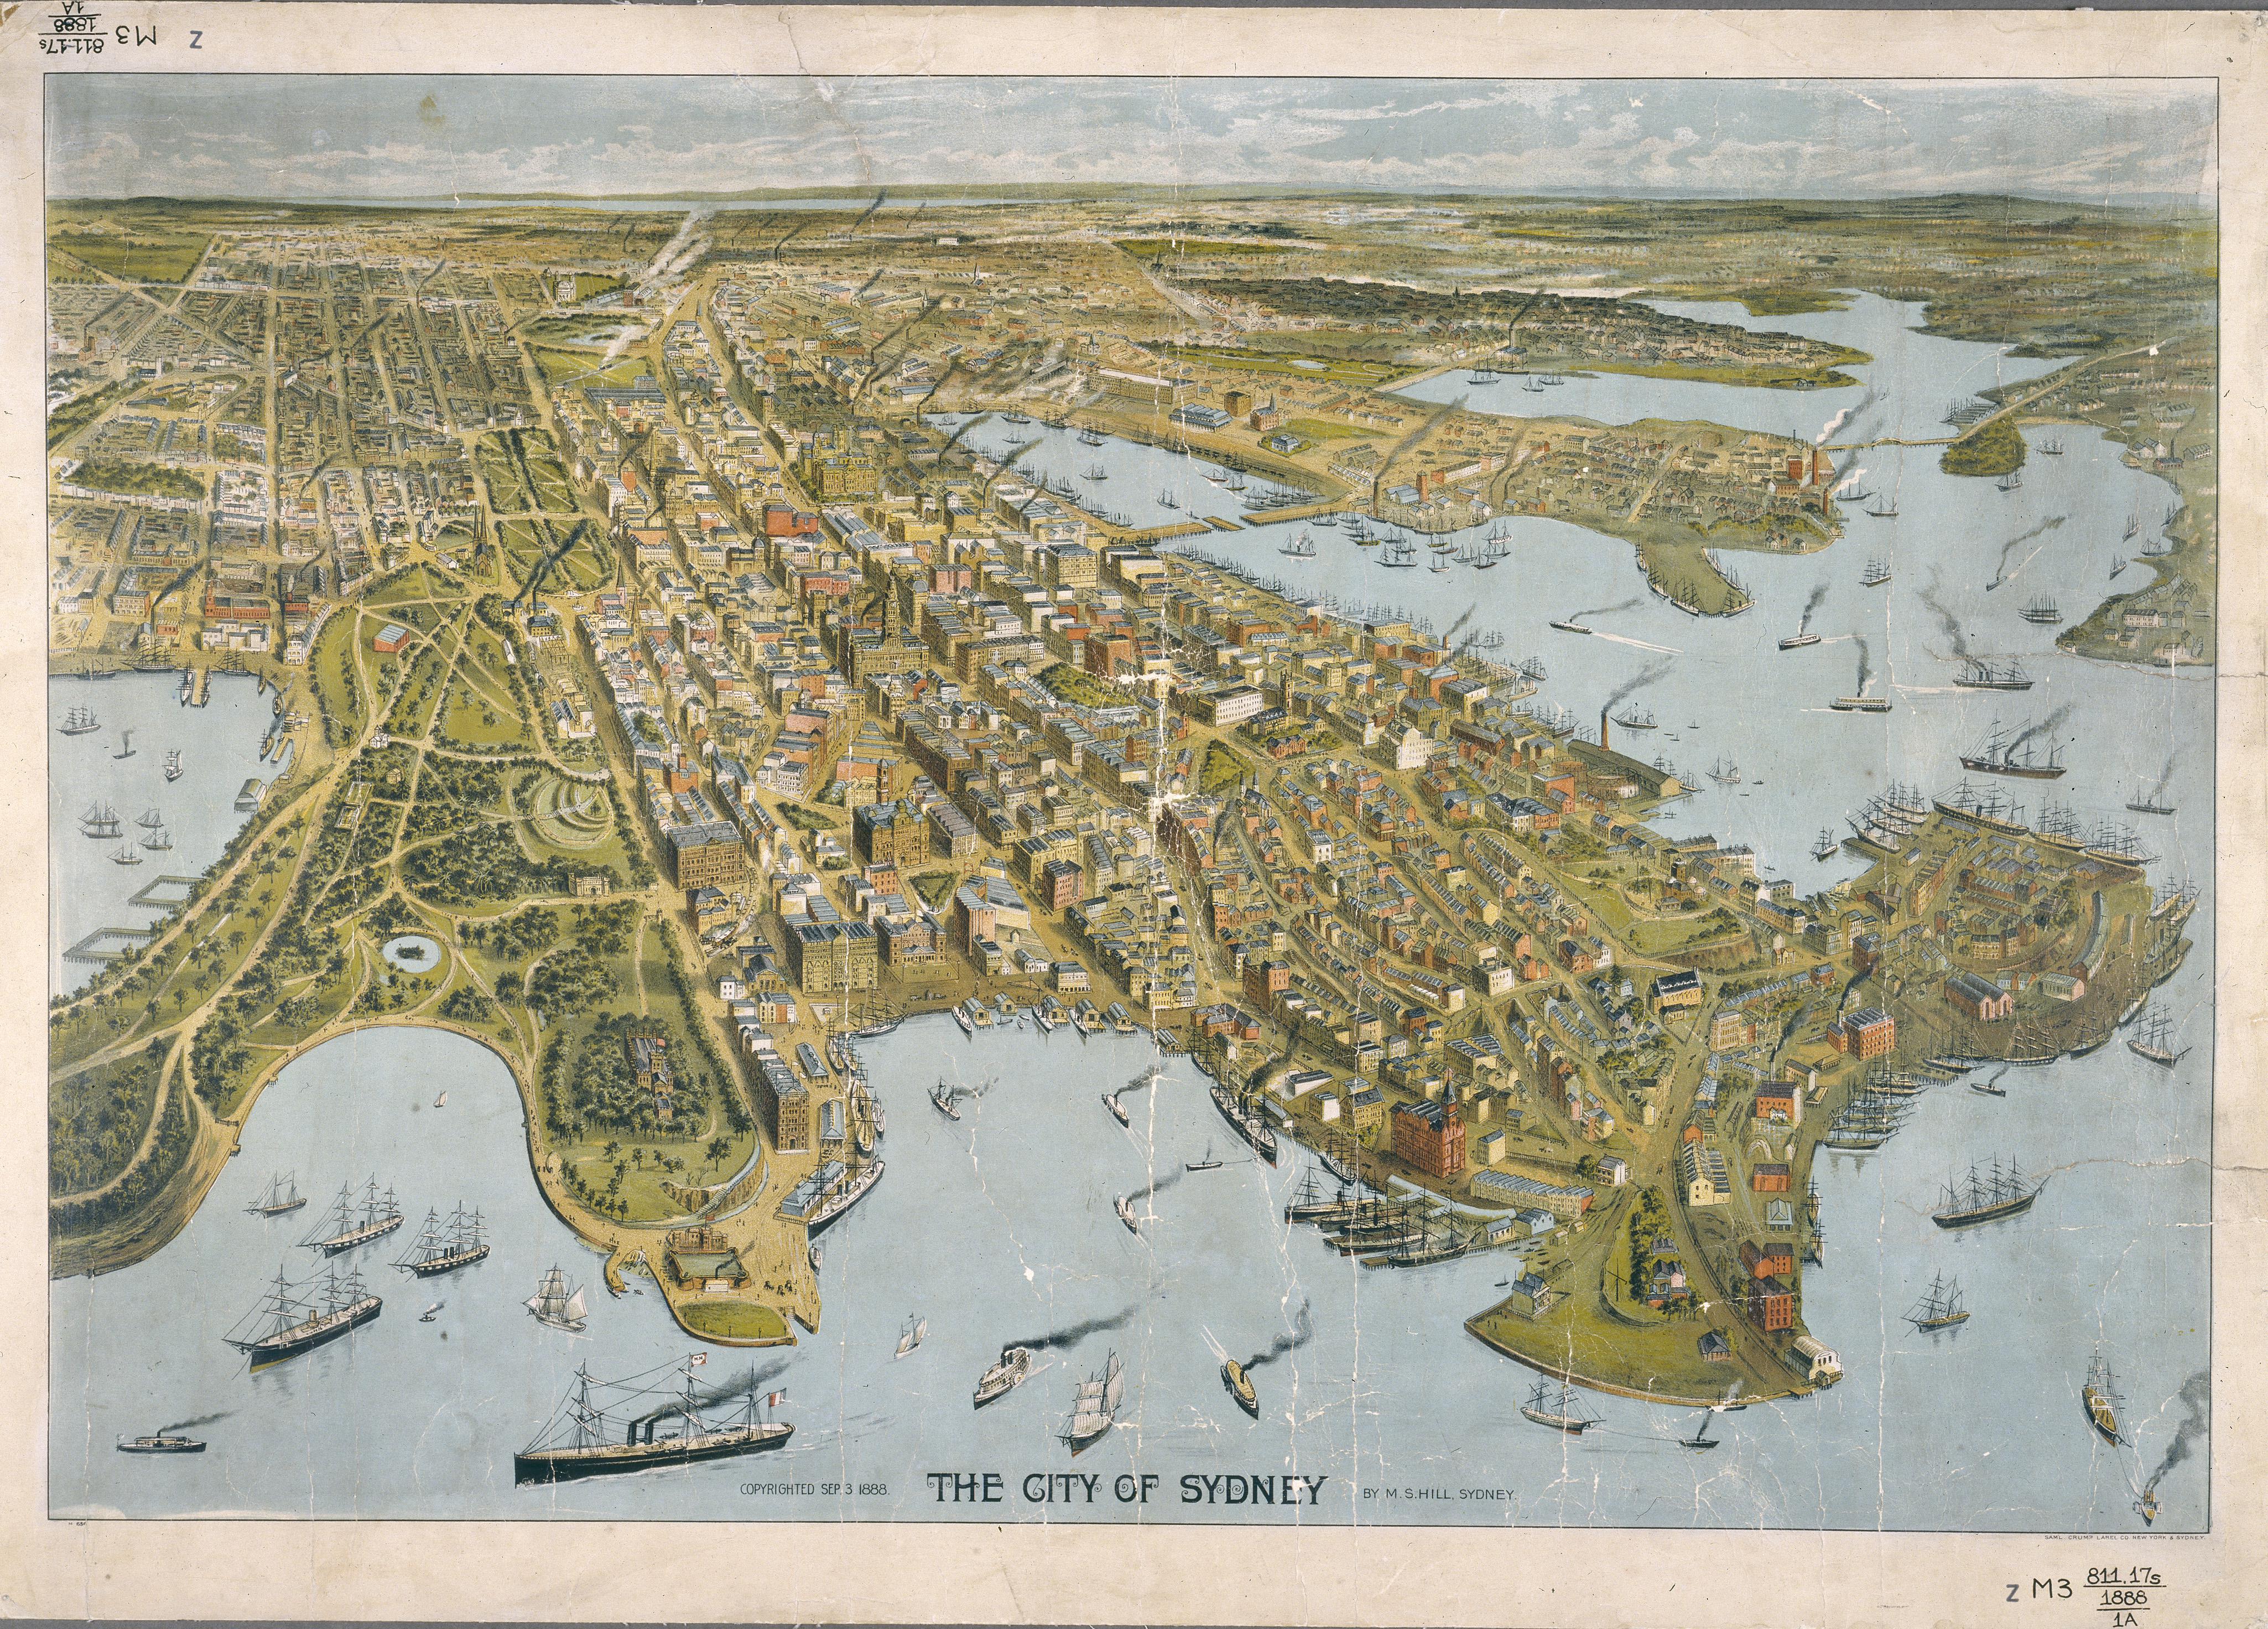 Awesome bird's eye view of Sydney from 1888.jpg